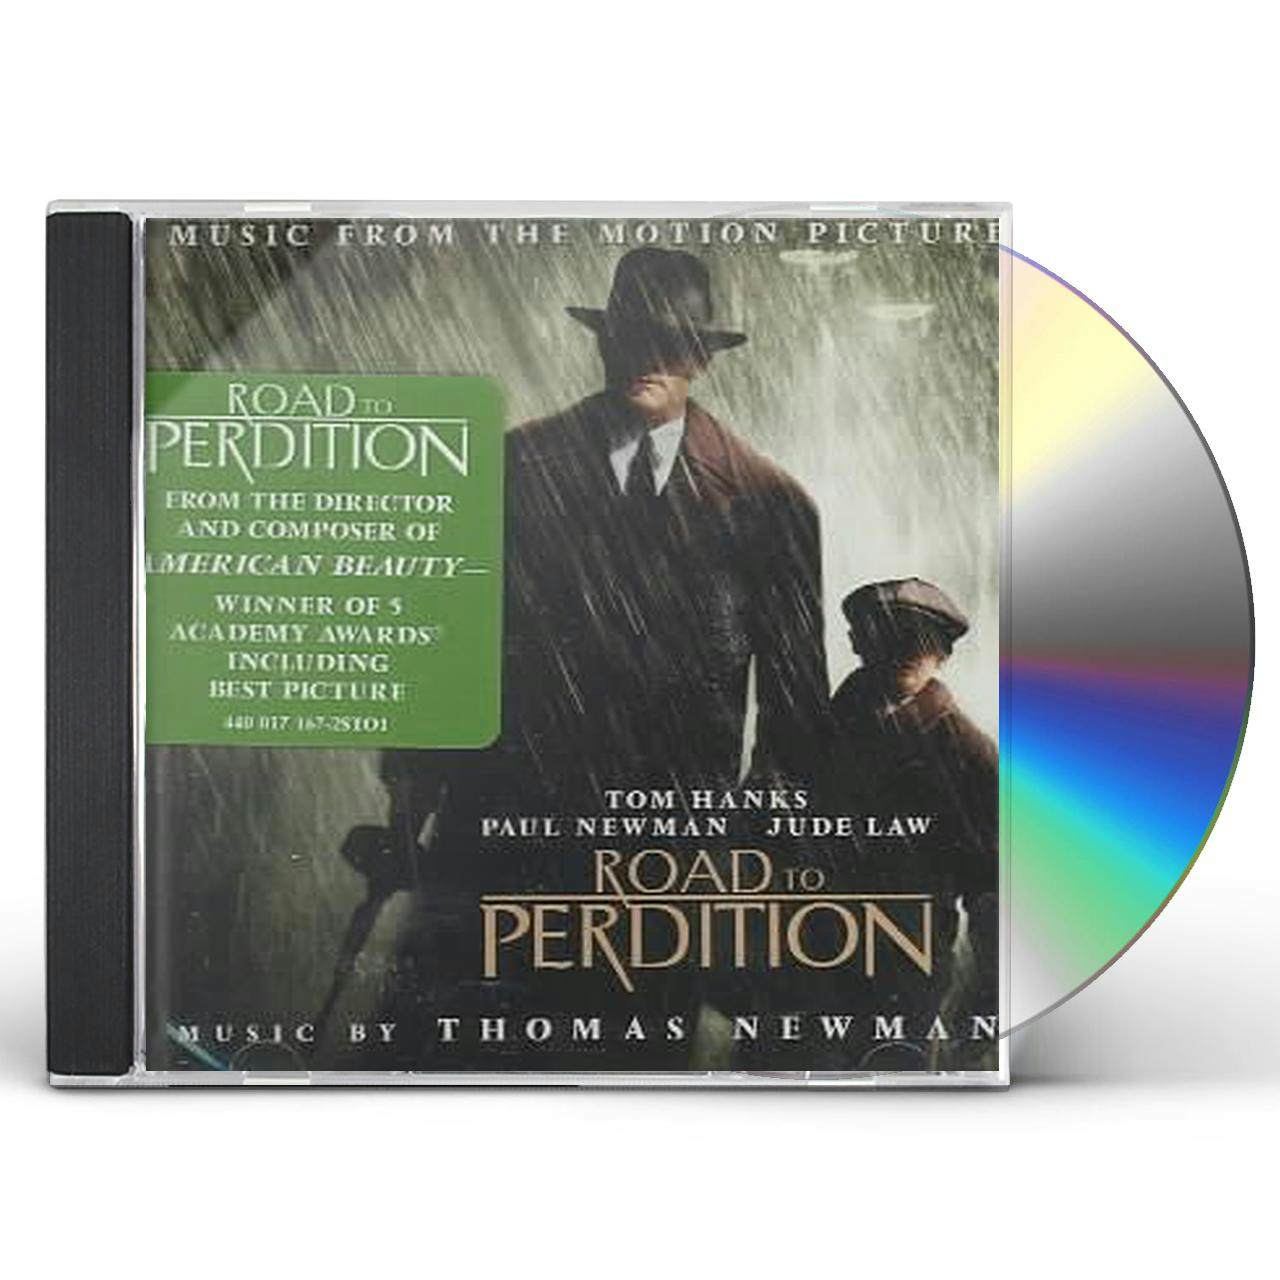 diana homesley recommends Road To Perdition Soundtrack